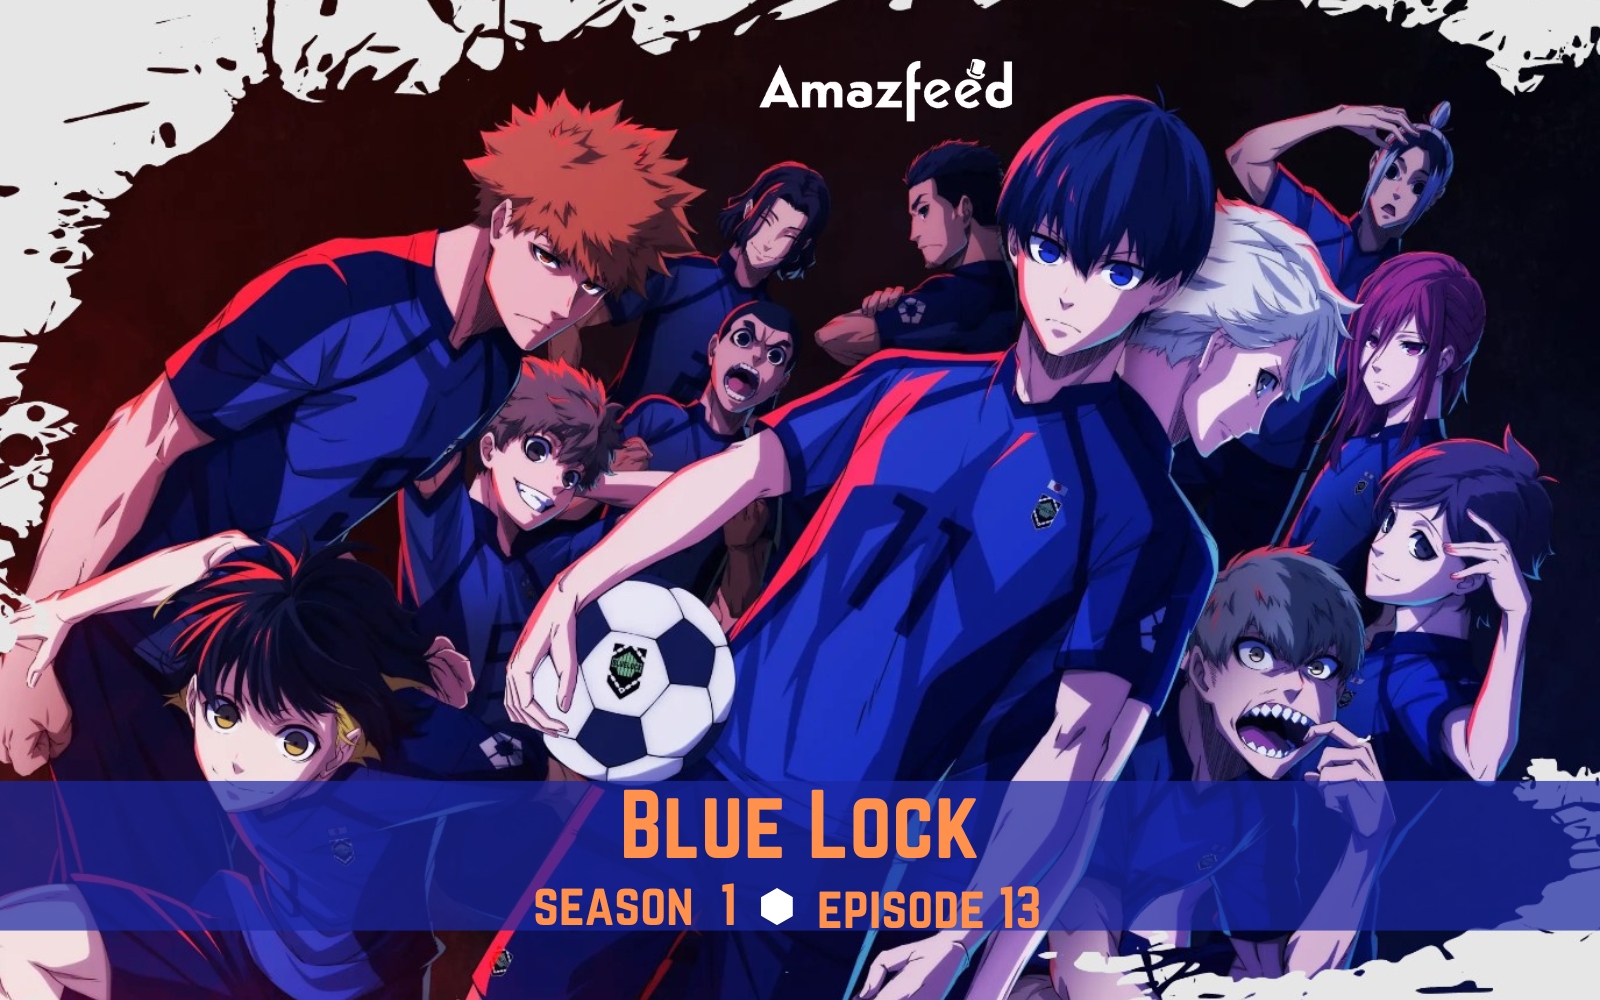 Blue Lock Episode 22  Release Date, Spoiler, Recap, Trailer, Characters,  Countdown, Where to Watch & More » Amazfeed